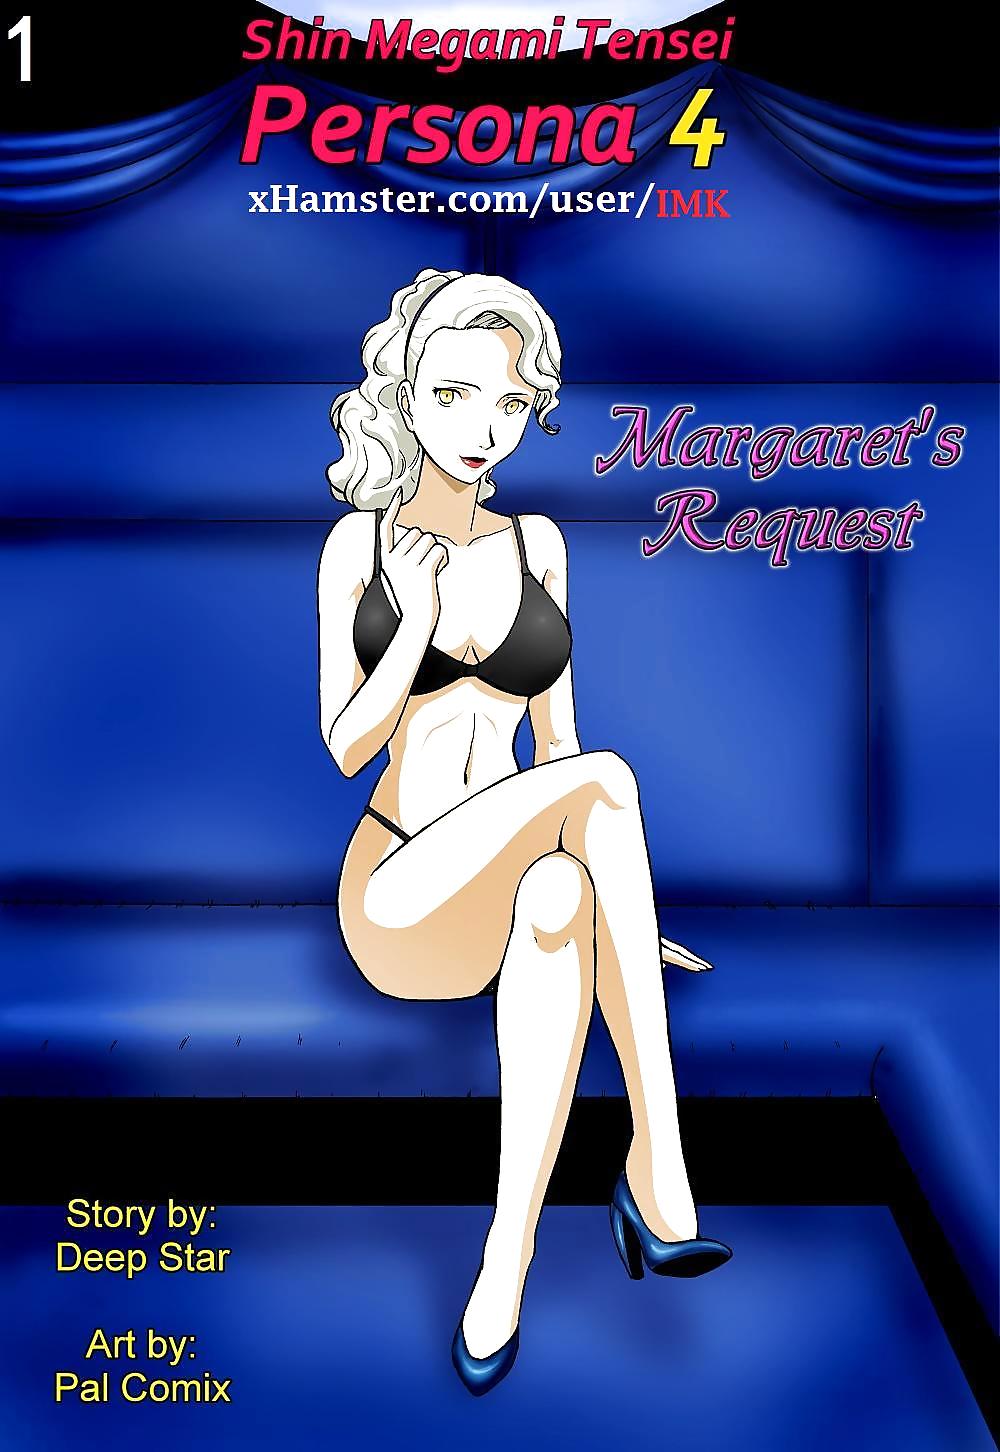 Persona 4 - Margaret's Request (by IMK) #1327554